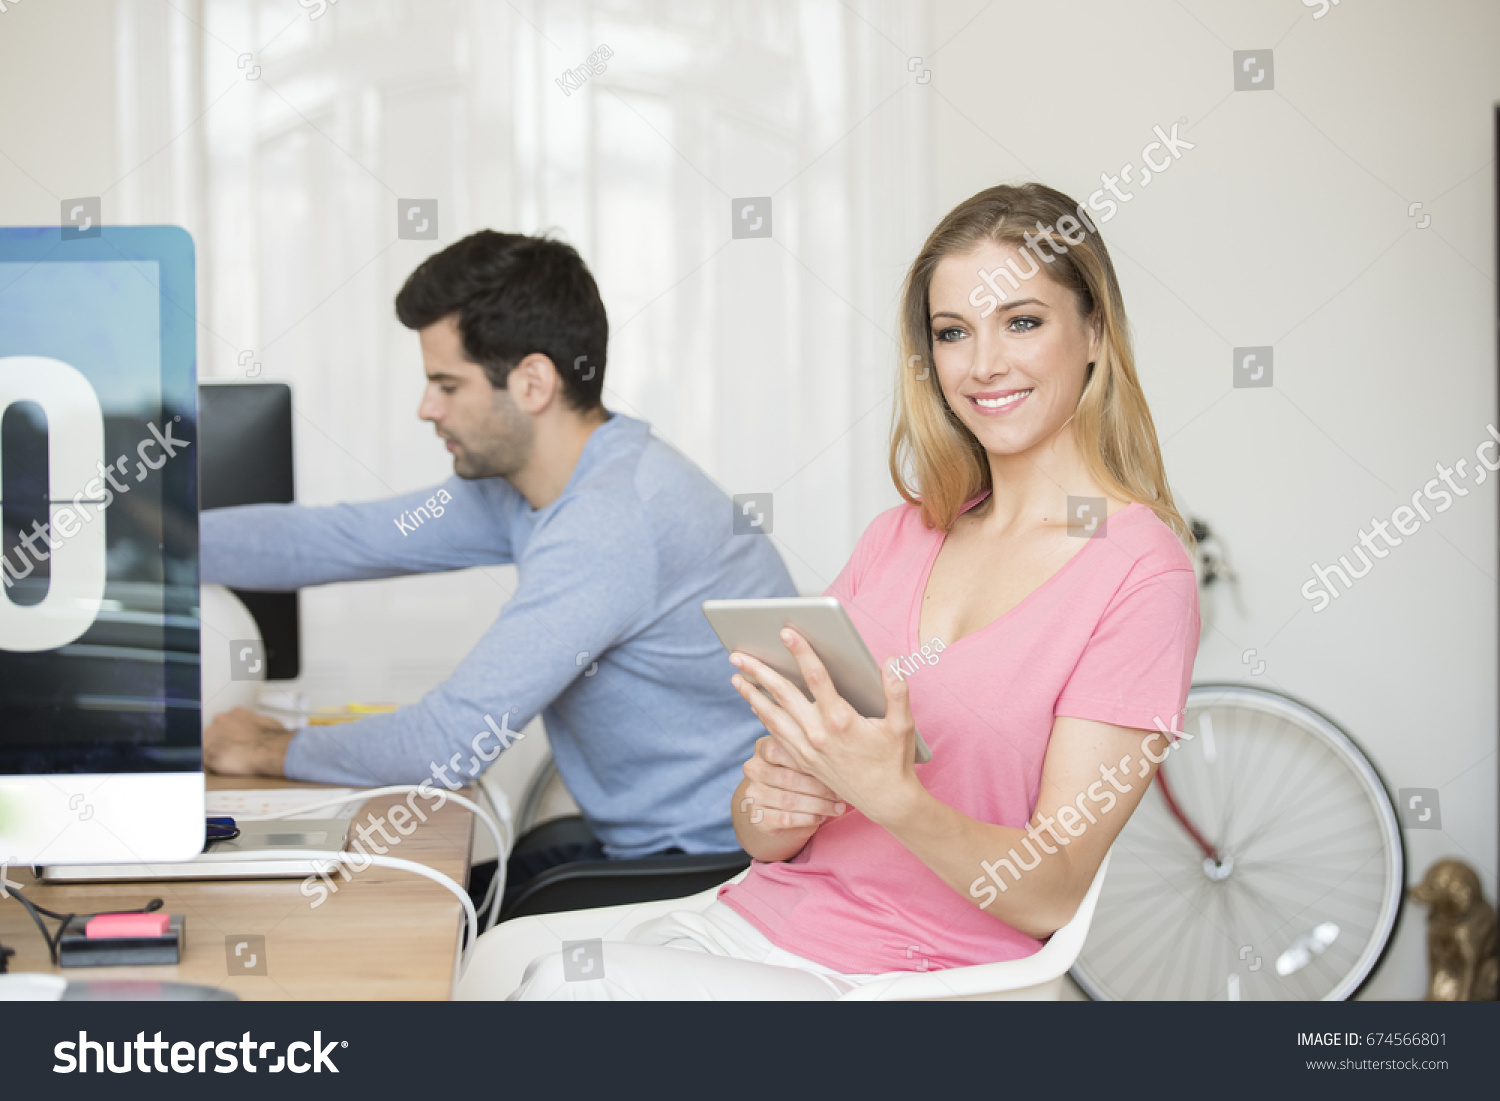 Shot of a young businesswoman using digital tablet while sitting at desk in the office.  #674566801